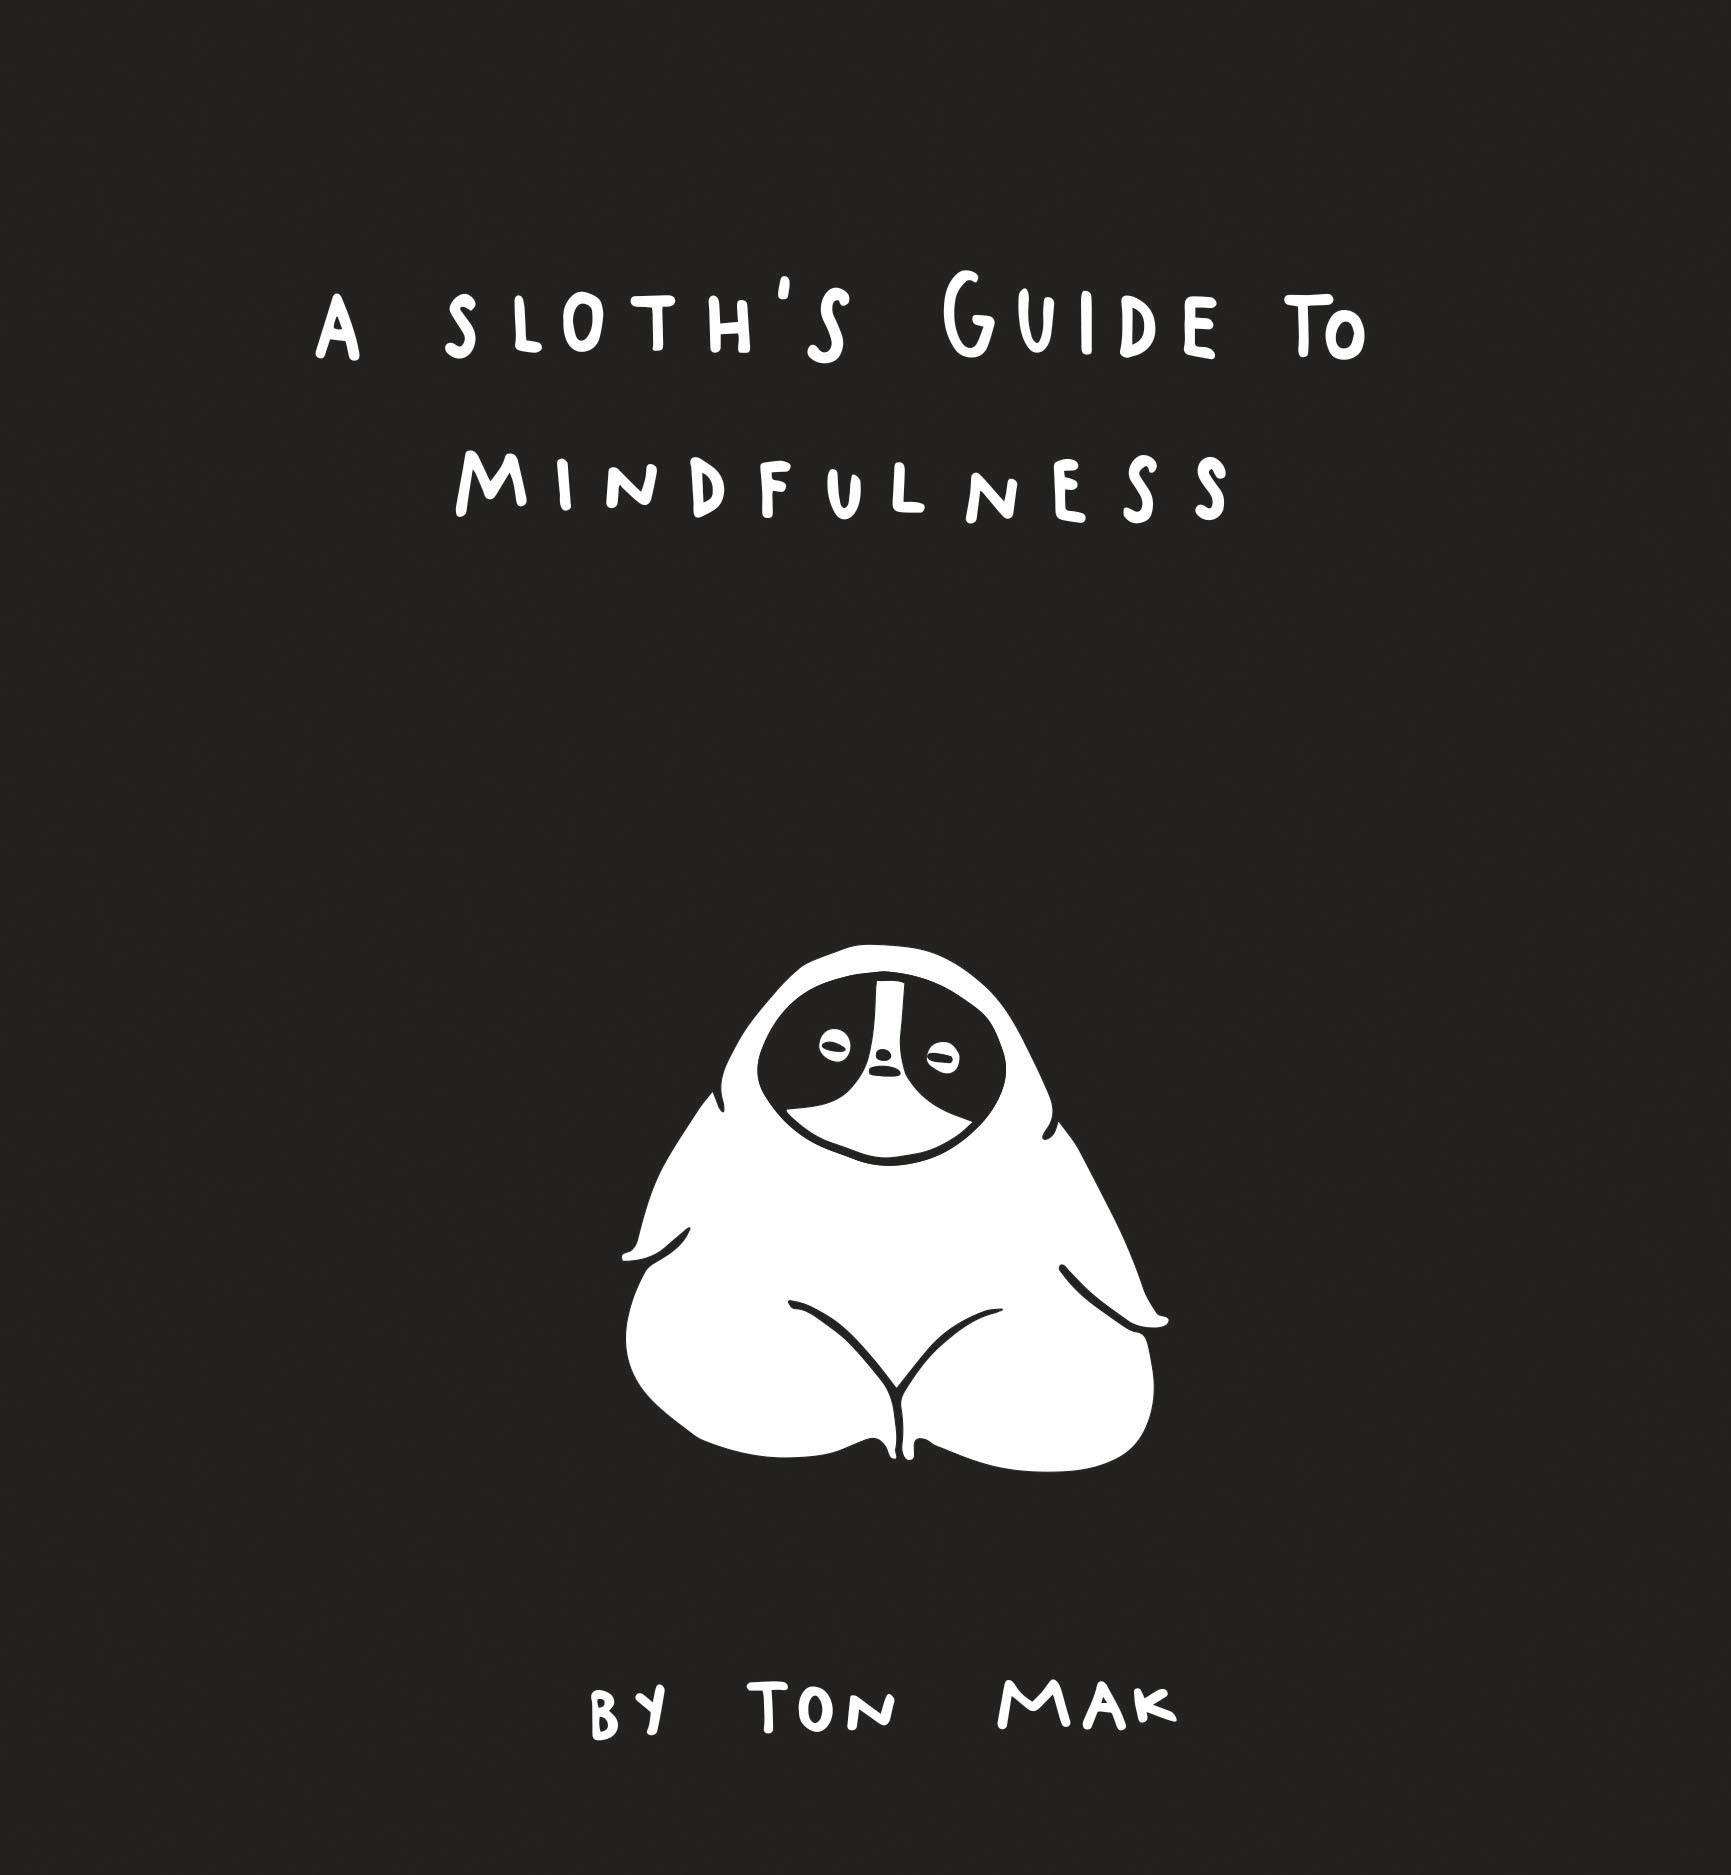 Discover How to Have a More Mindful, PhiloSLOTHical Life with A Sloth’s Guide to Mindfulness